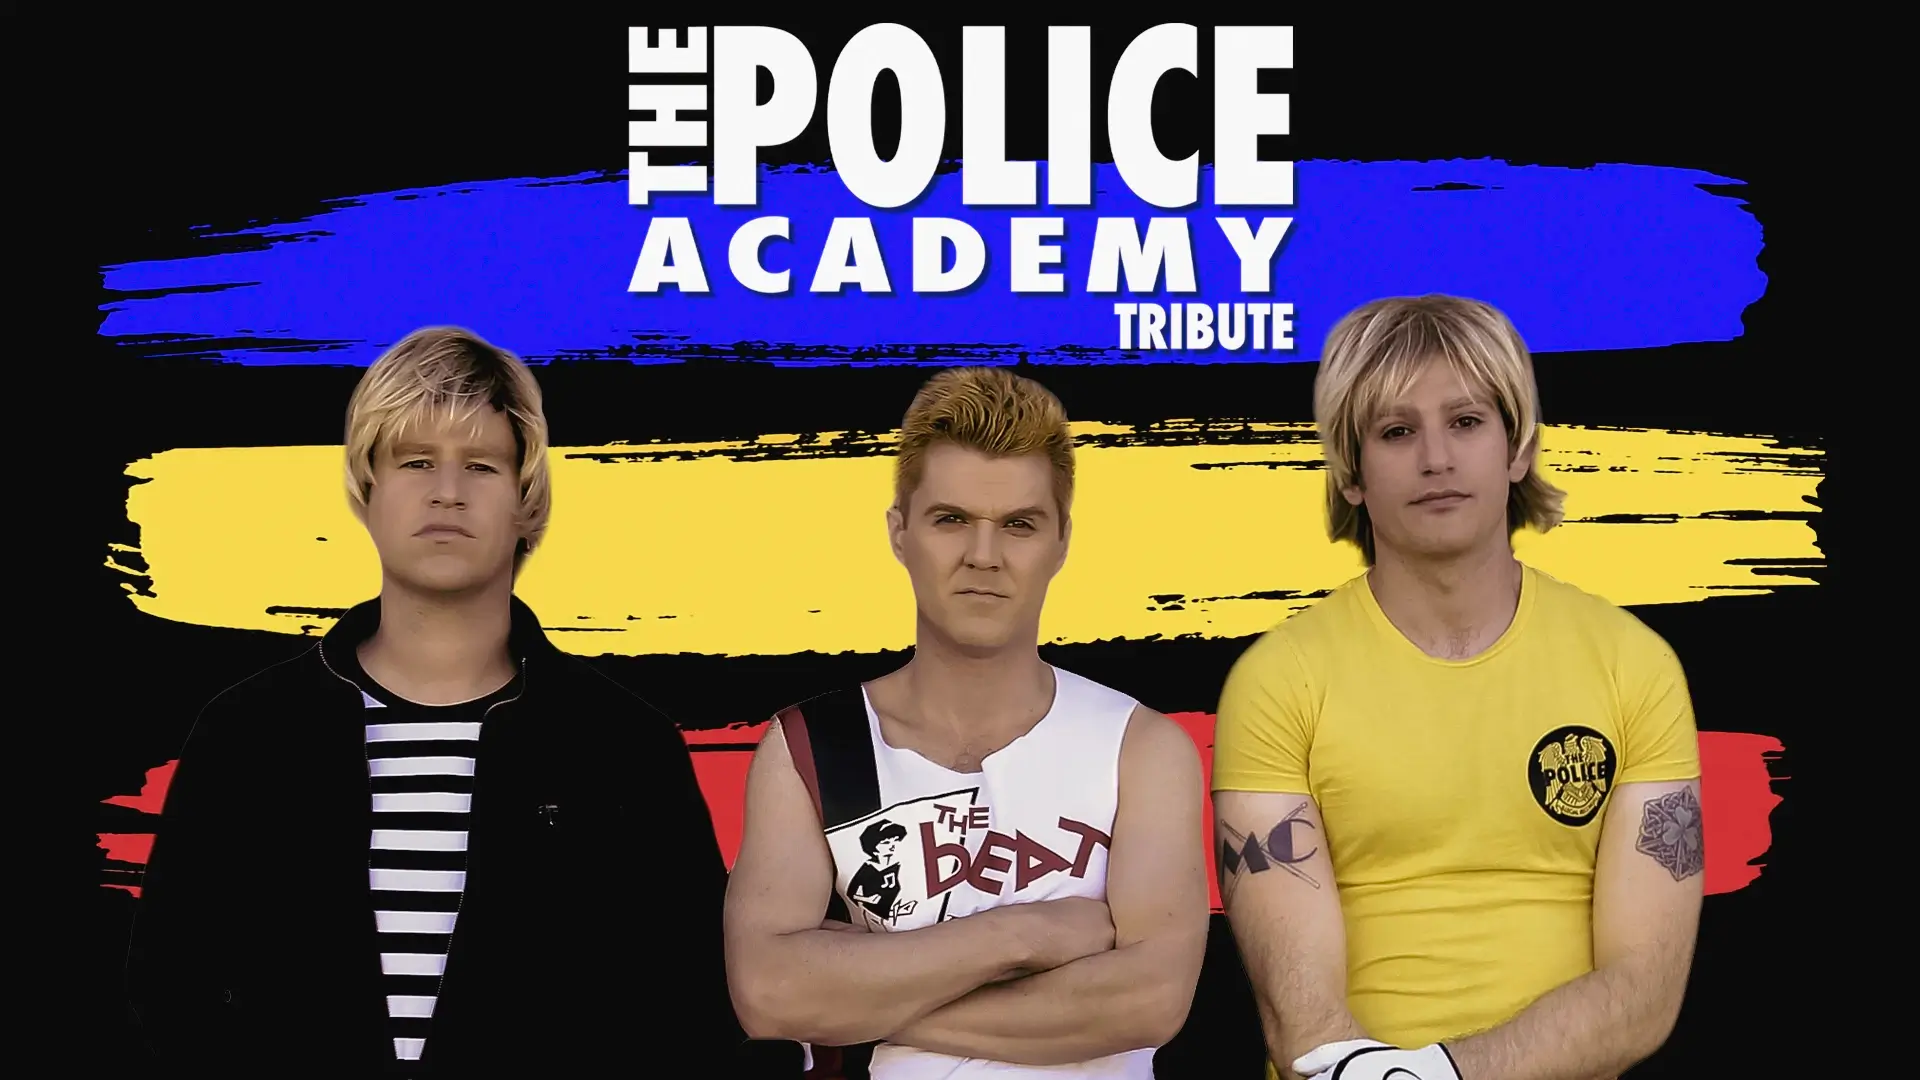 The Police Academy tribute - America's Greatest tribute to The Police!